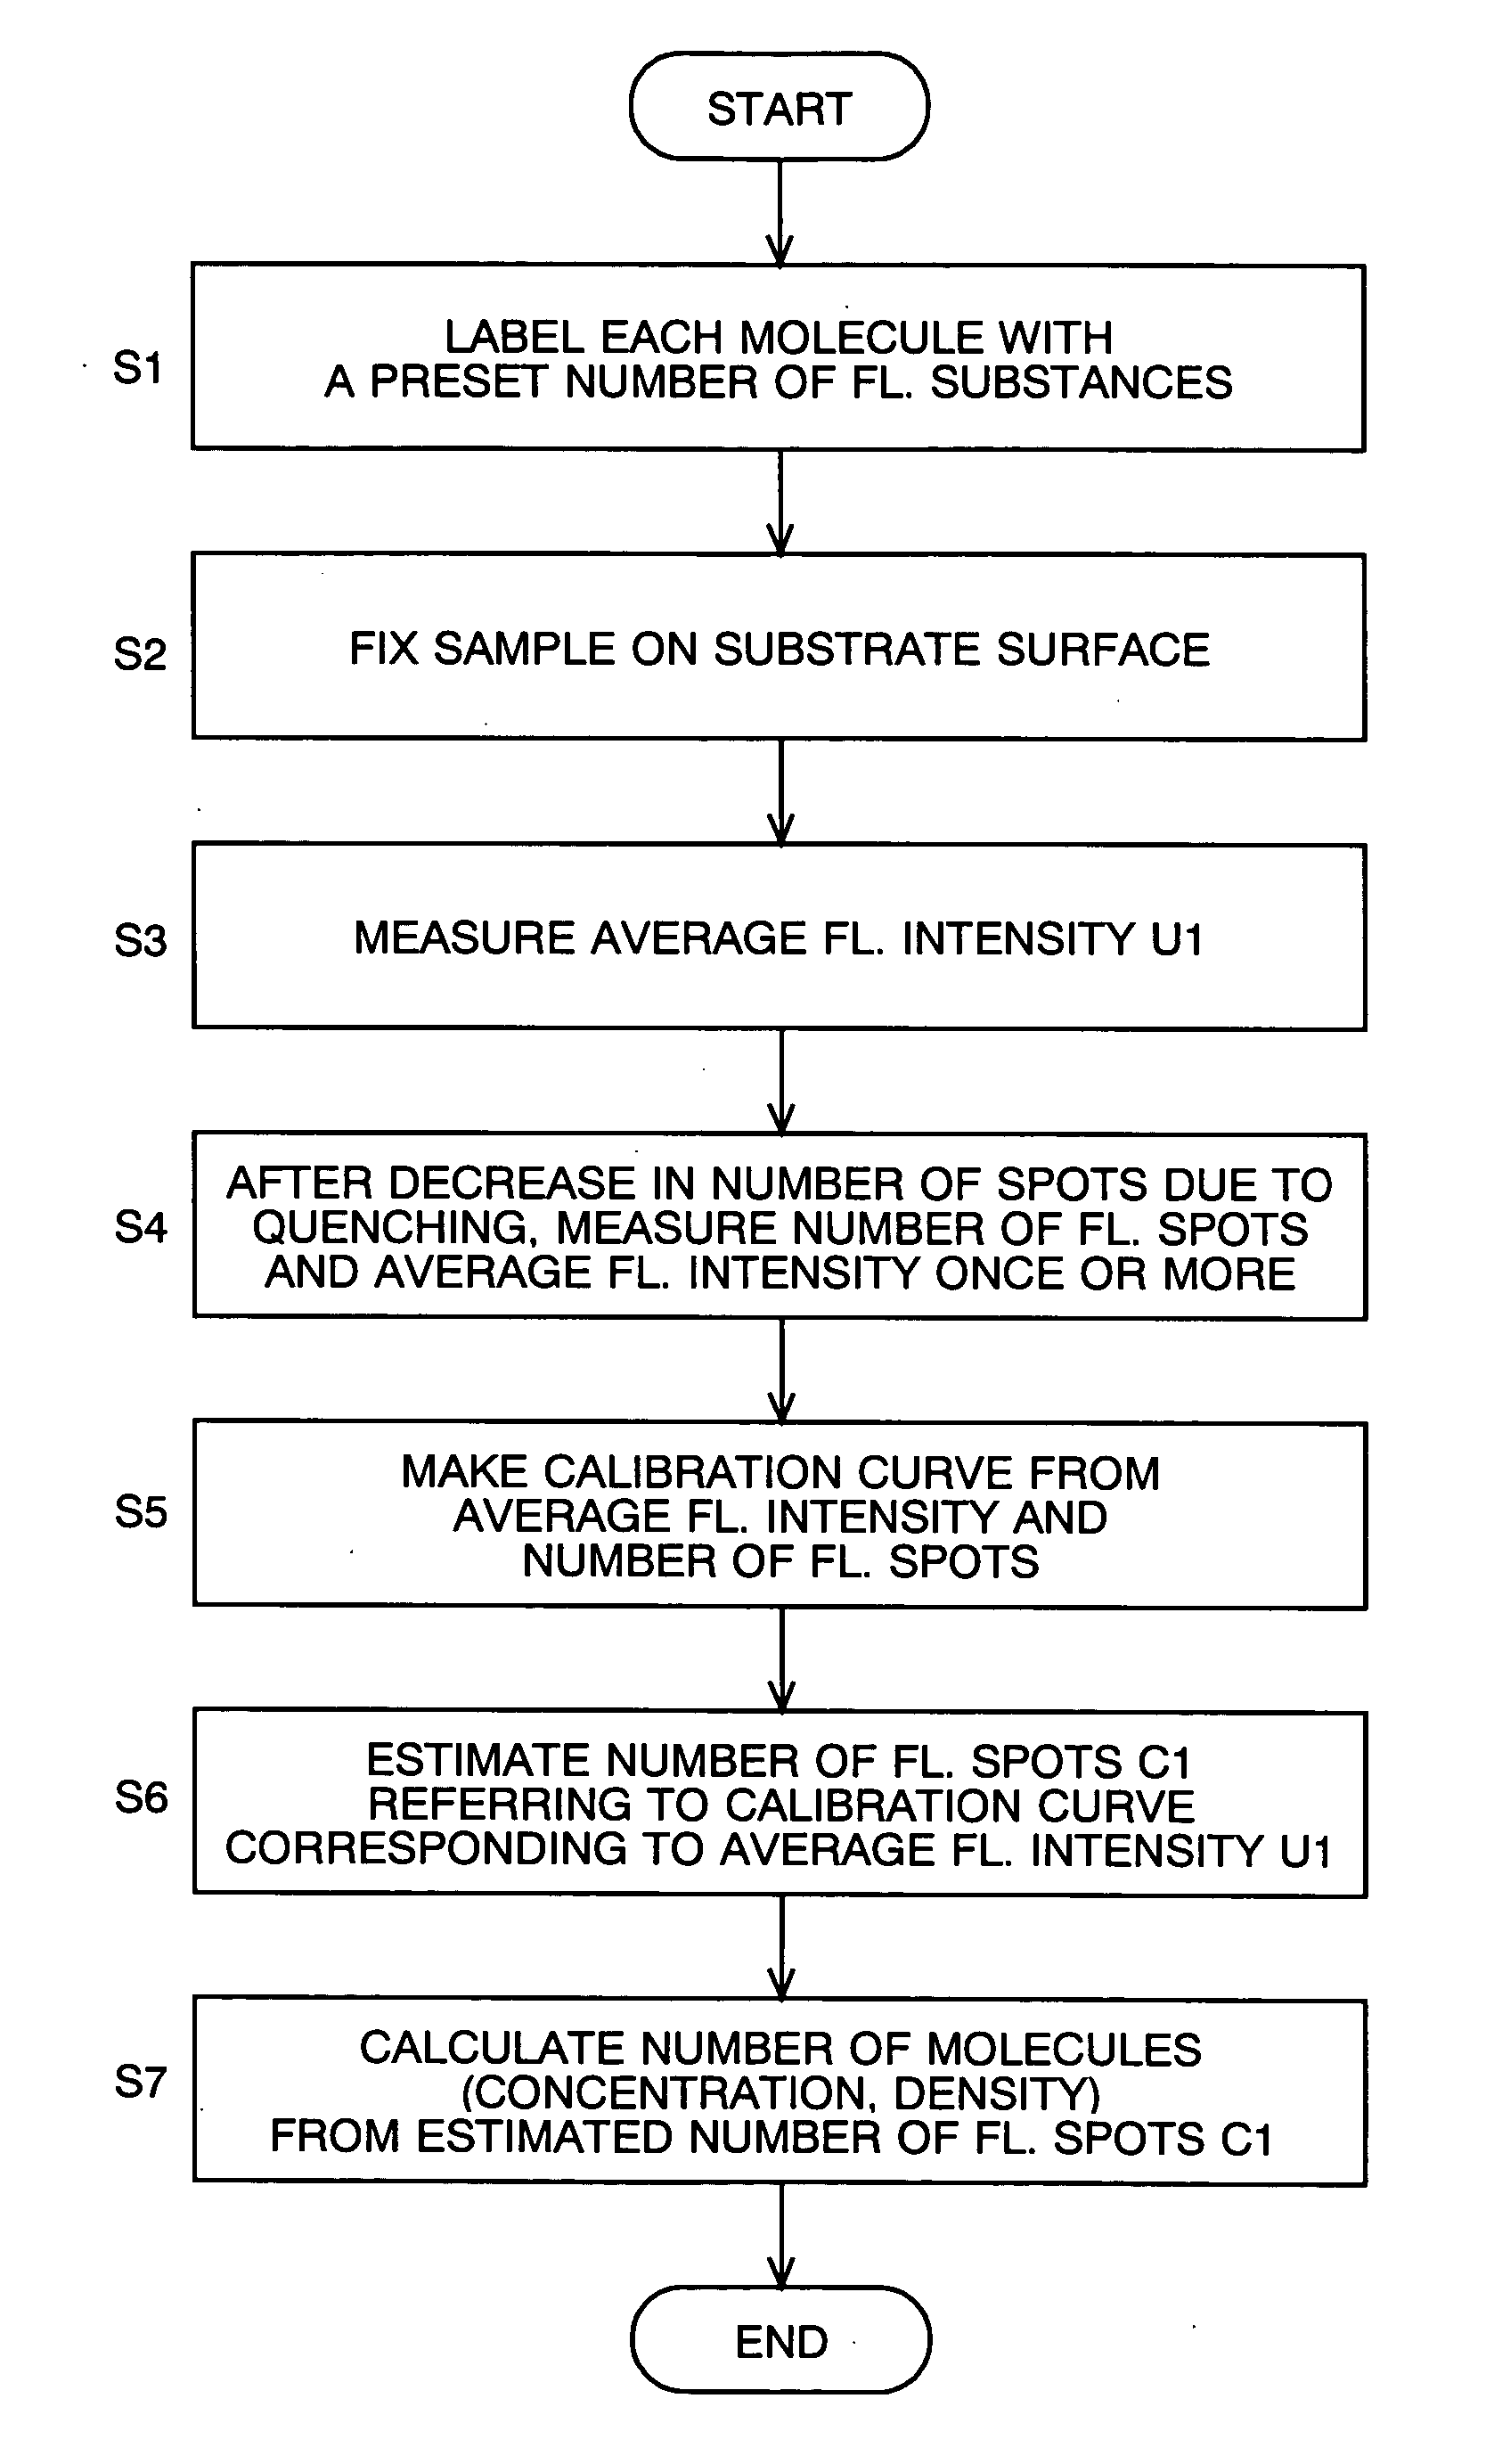 Method of measuring number of molecules or molecular density of a sample fixed on a substrate surface